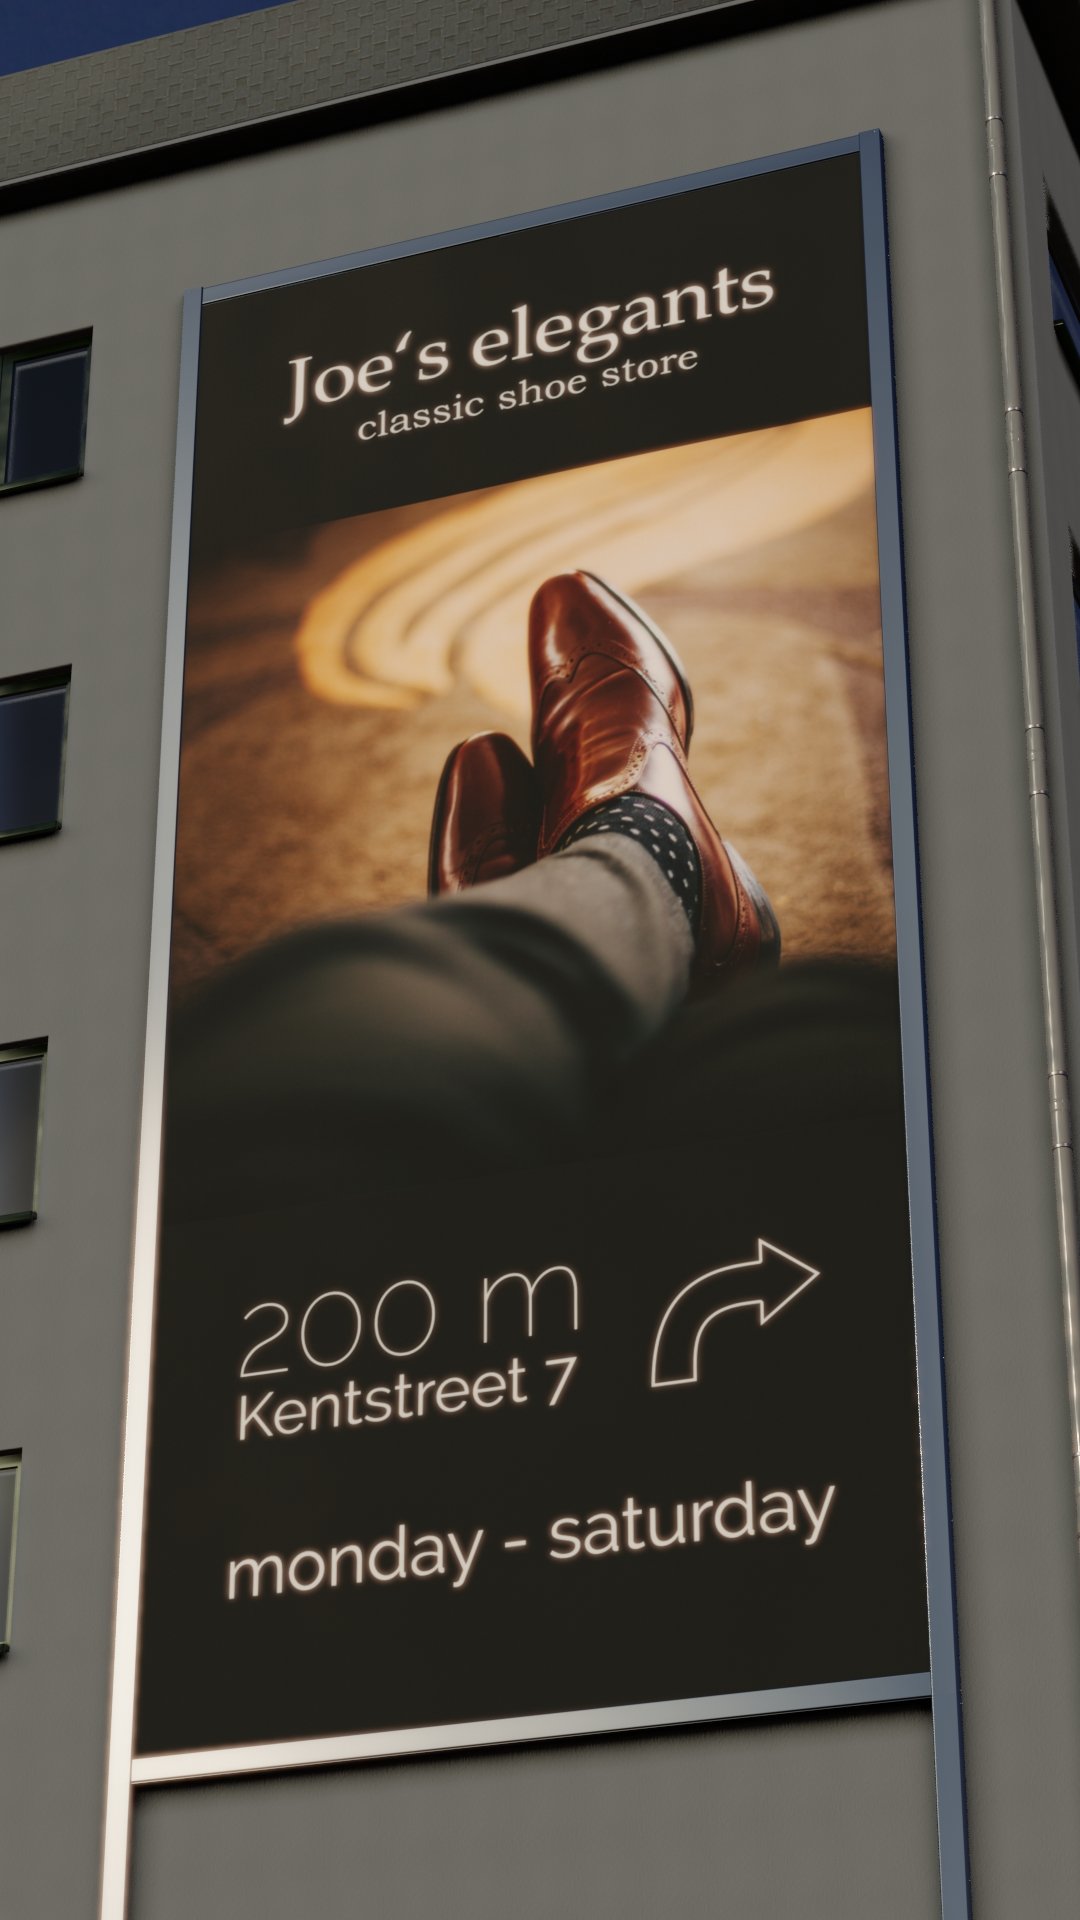 Example for a advertising banner wall mount system